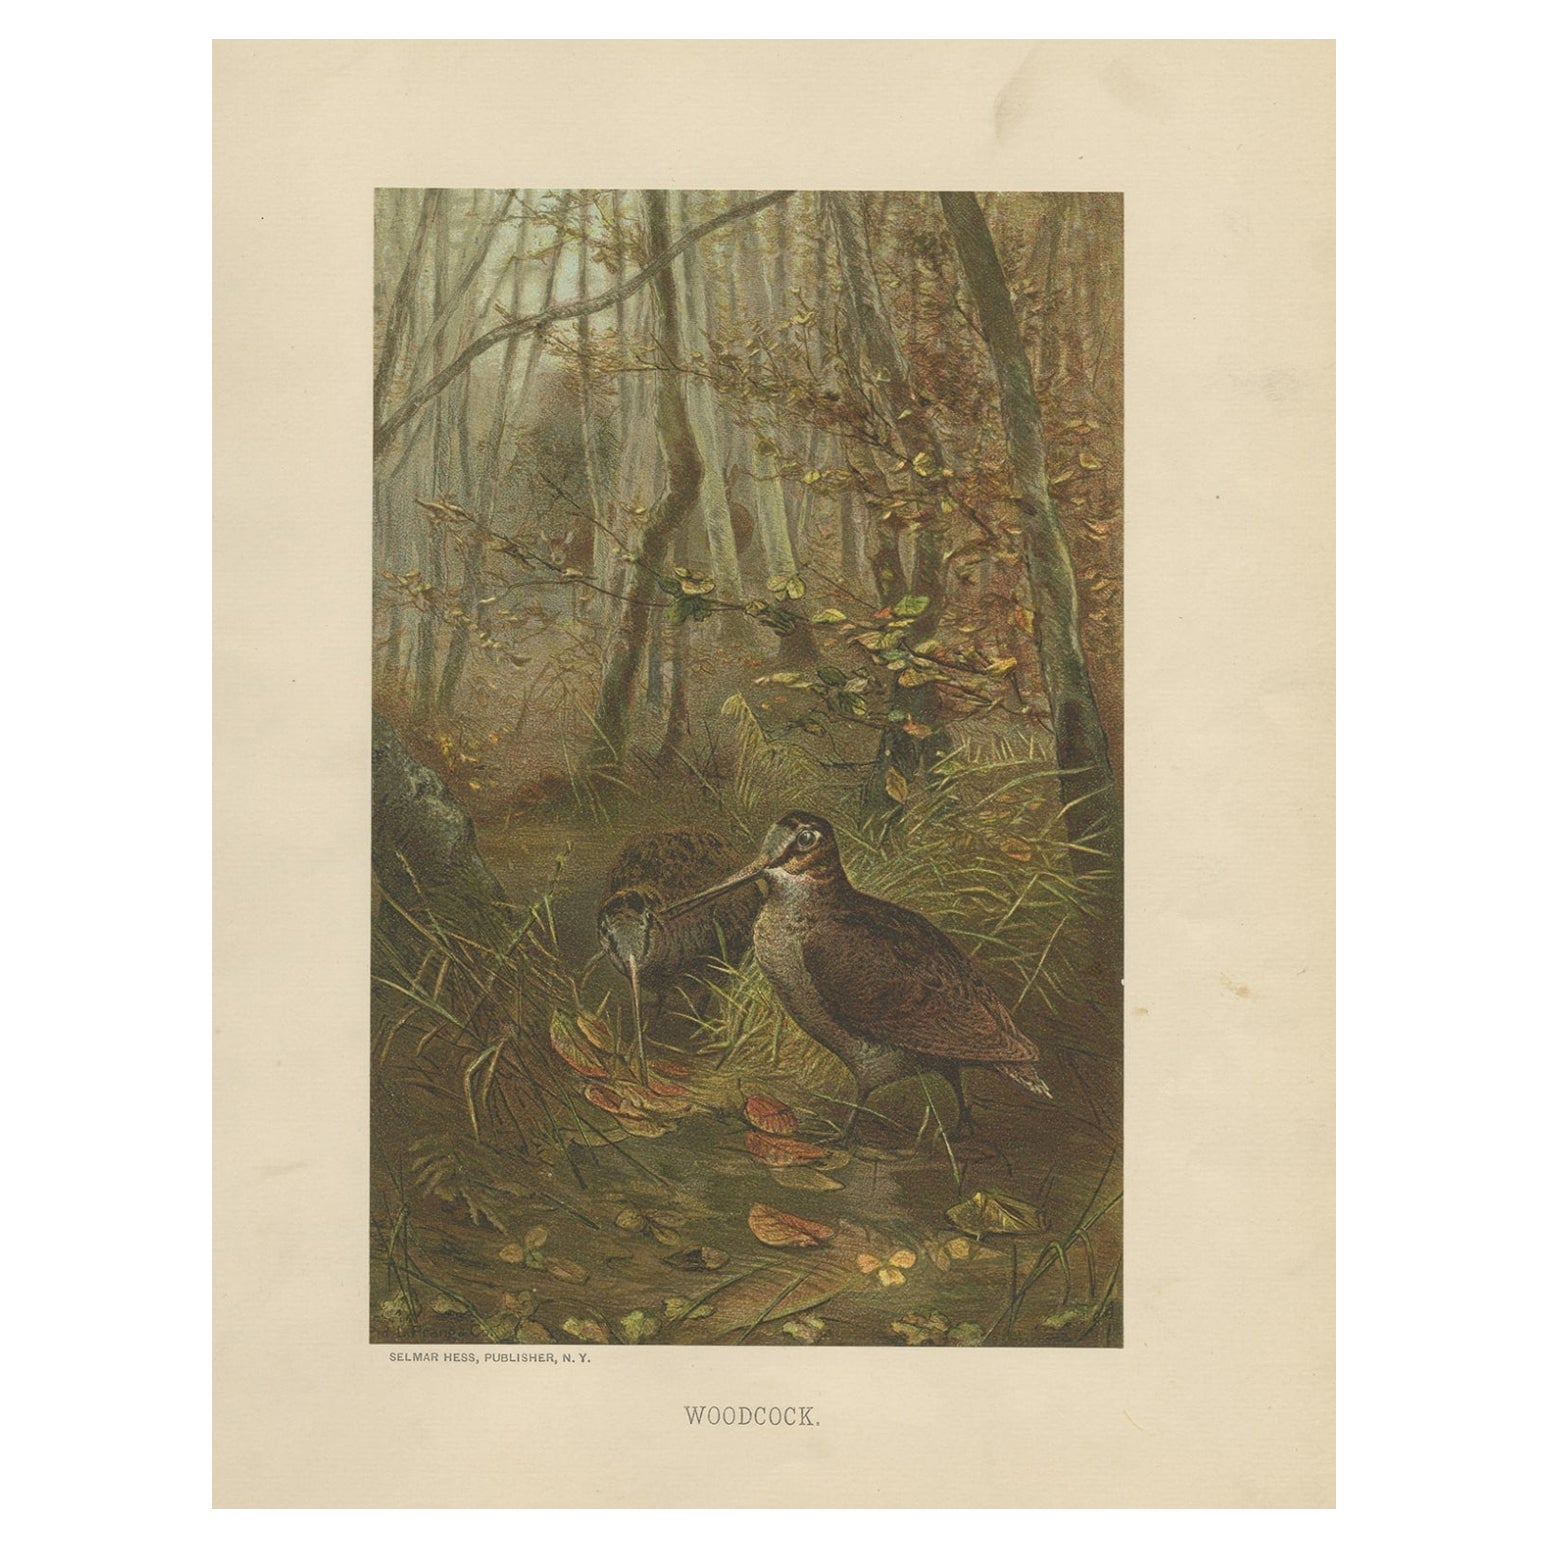 Antique bird print titled 'Woodcock'. Old bird print depicting the woodcock wading bird. This chromolithograph originates from the natural history set 'Animate Creation' published in 1898 by Selmar Hess in New York. 

Artists and Engravers: Louis